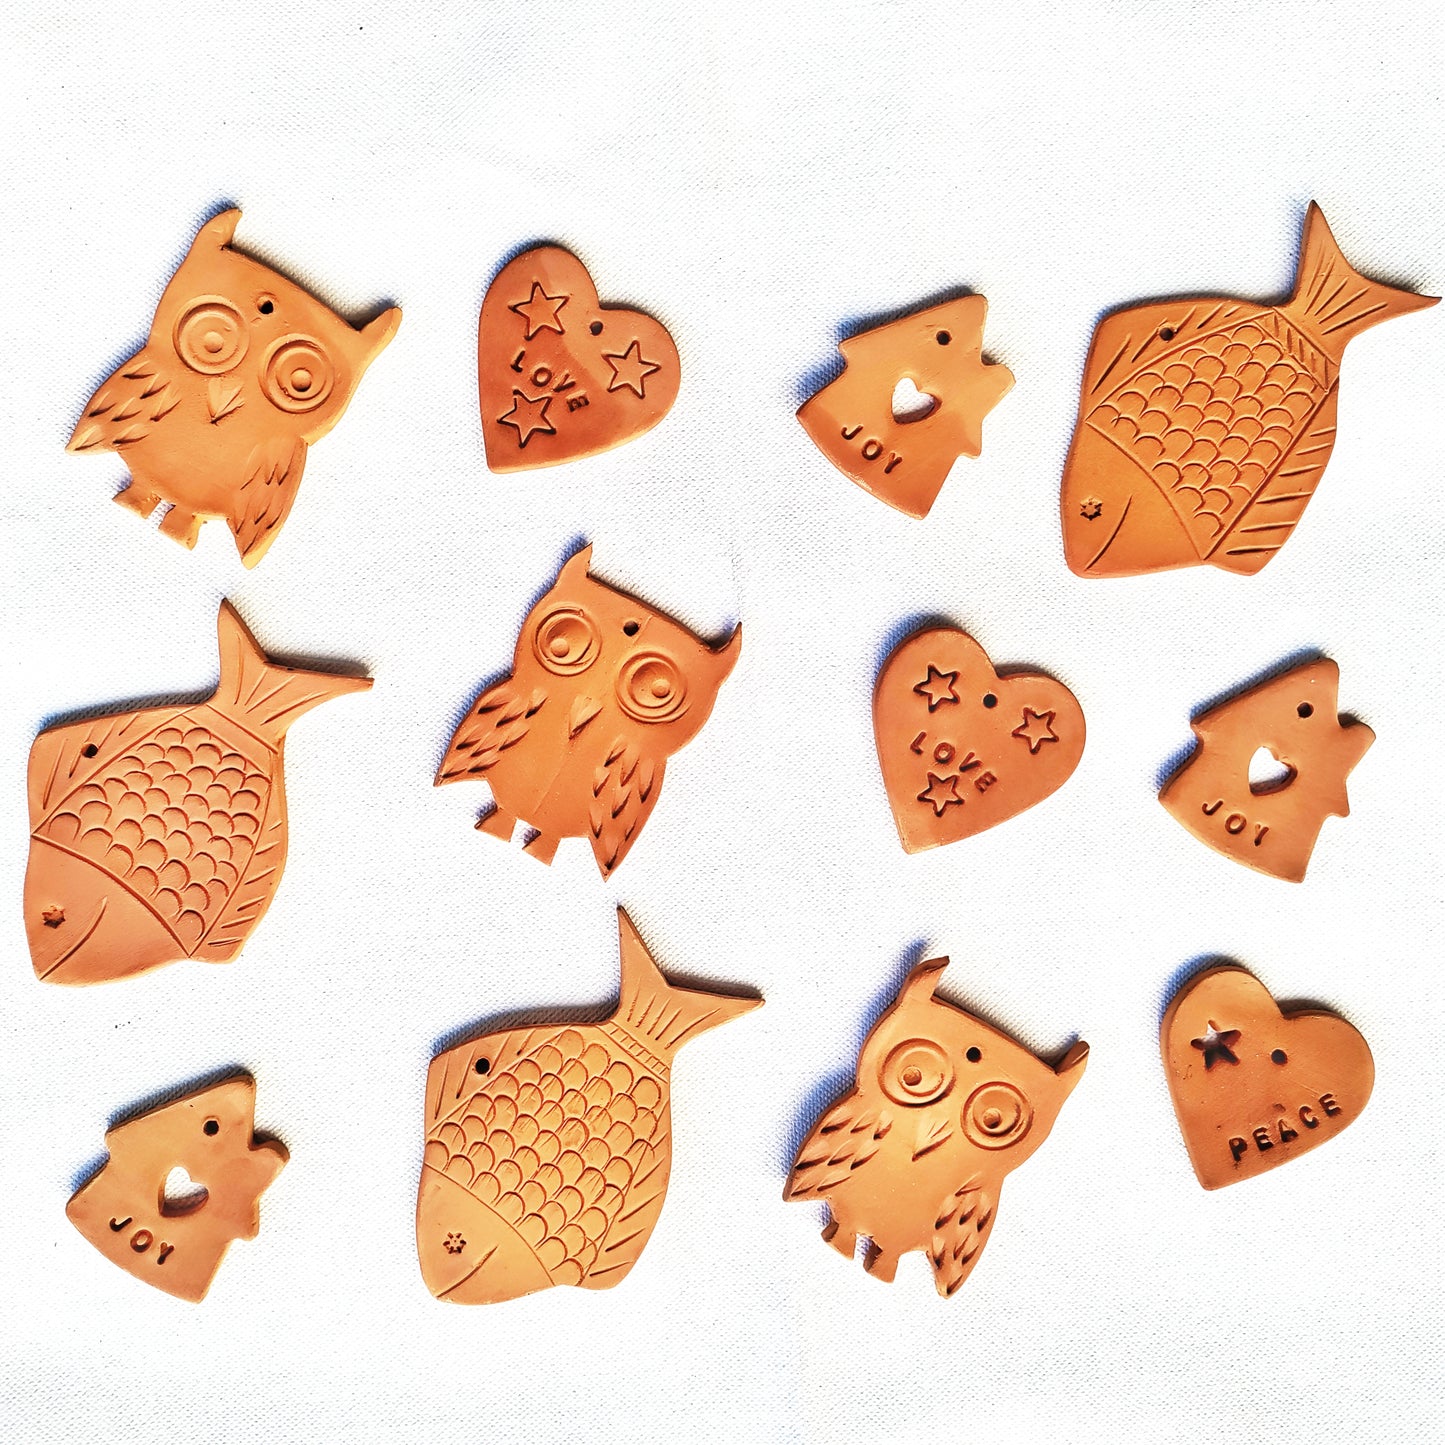 Handmade Terracotta Decorations and Ornaments | Set of 12